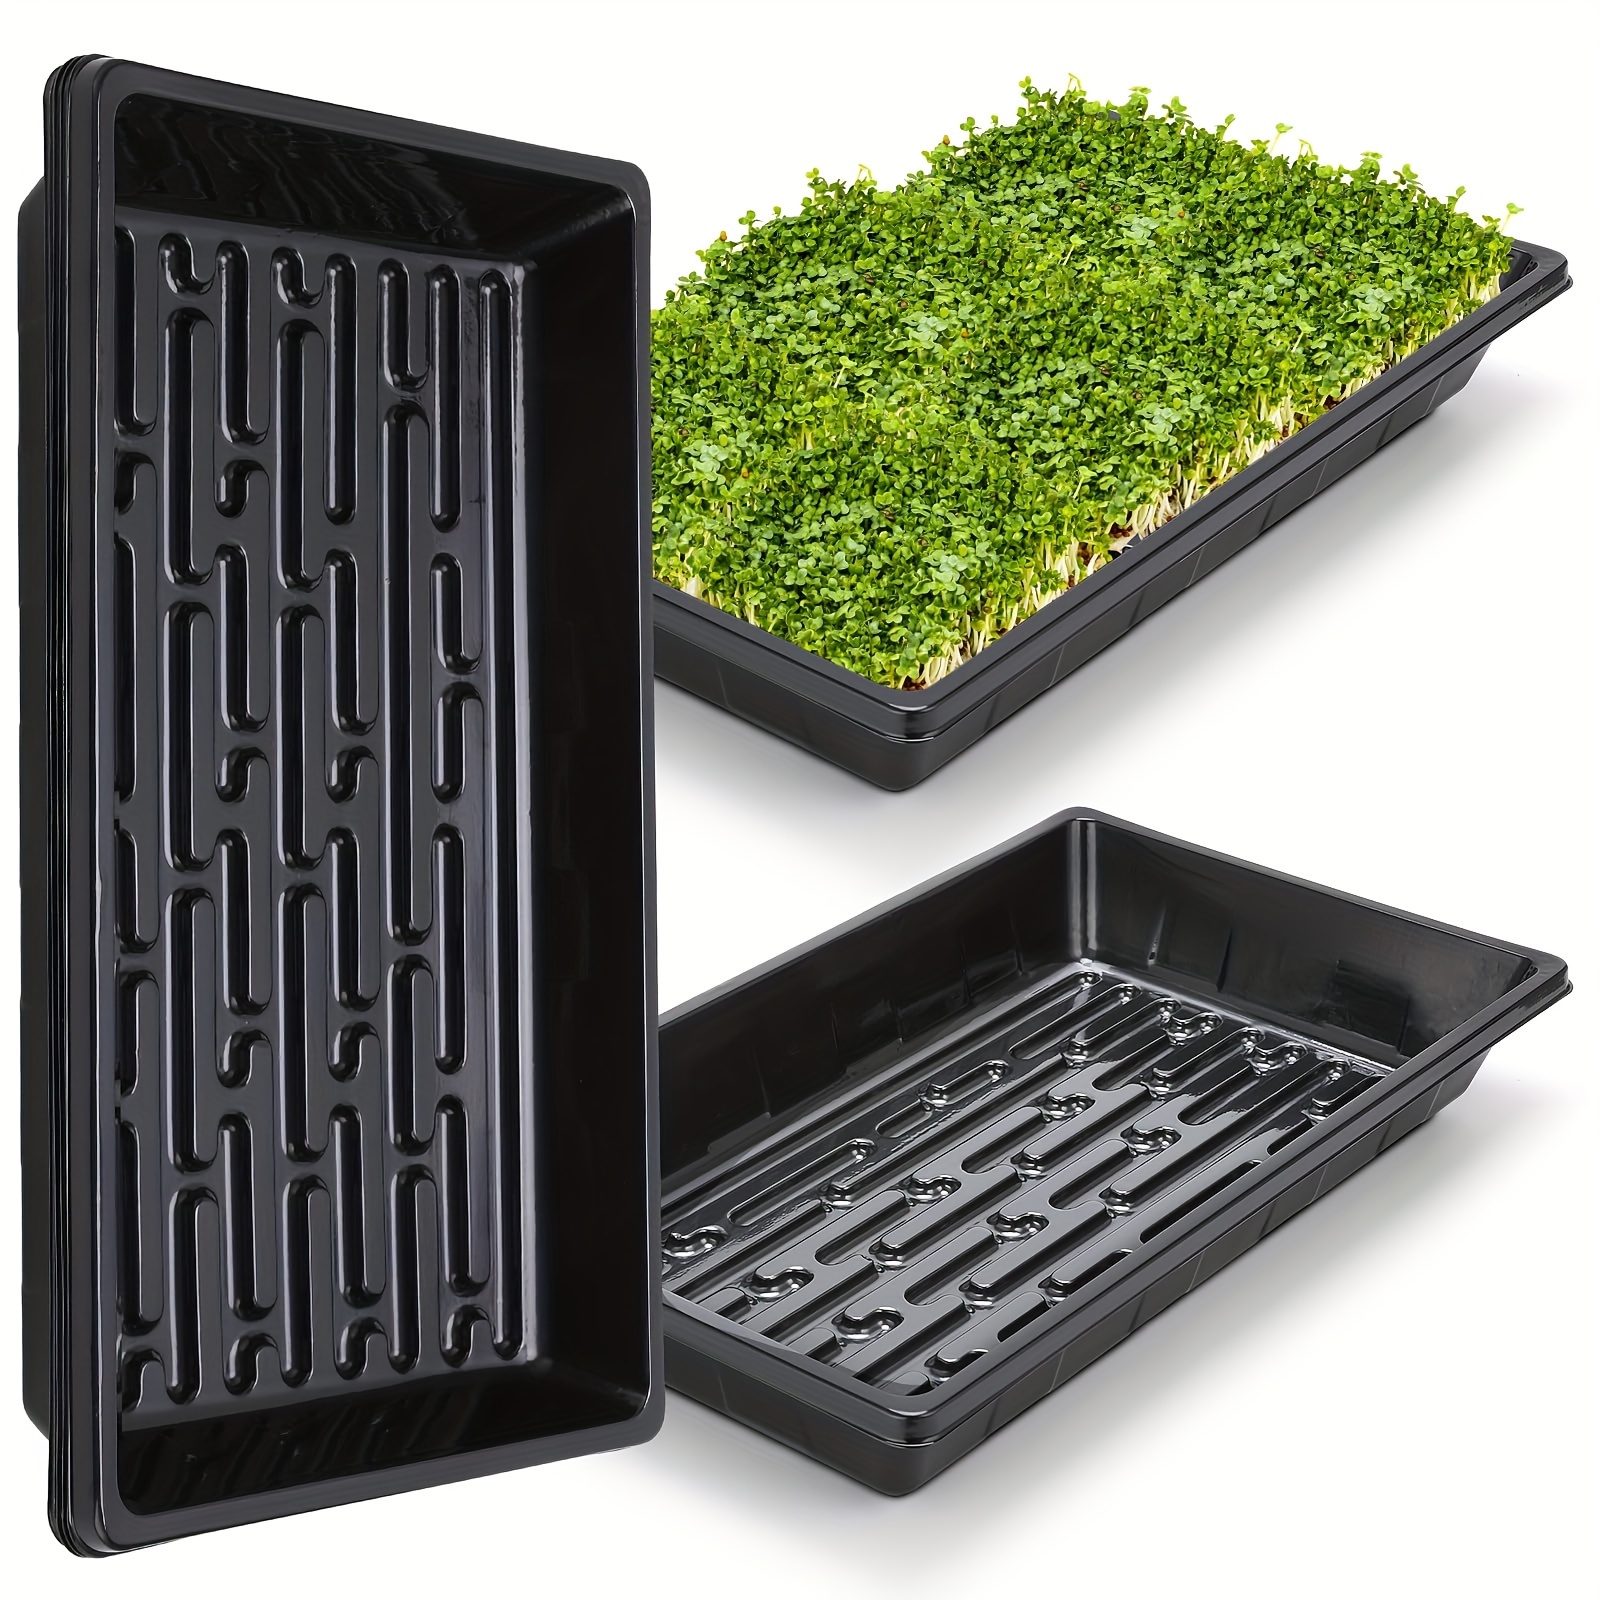 

5 Packs/10 Packs, Plant Growing Trays Without Drain Holes, Durable Black Plastic Trays For Plants, Growing Trays Seedling Plant Germination Starter Tray Transplant Fodder Flats